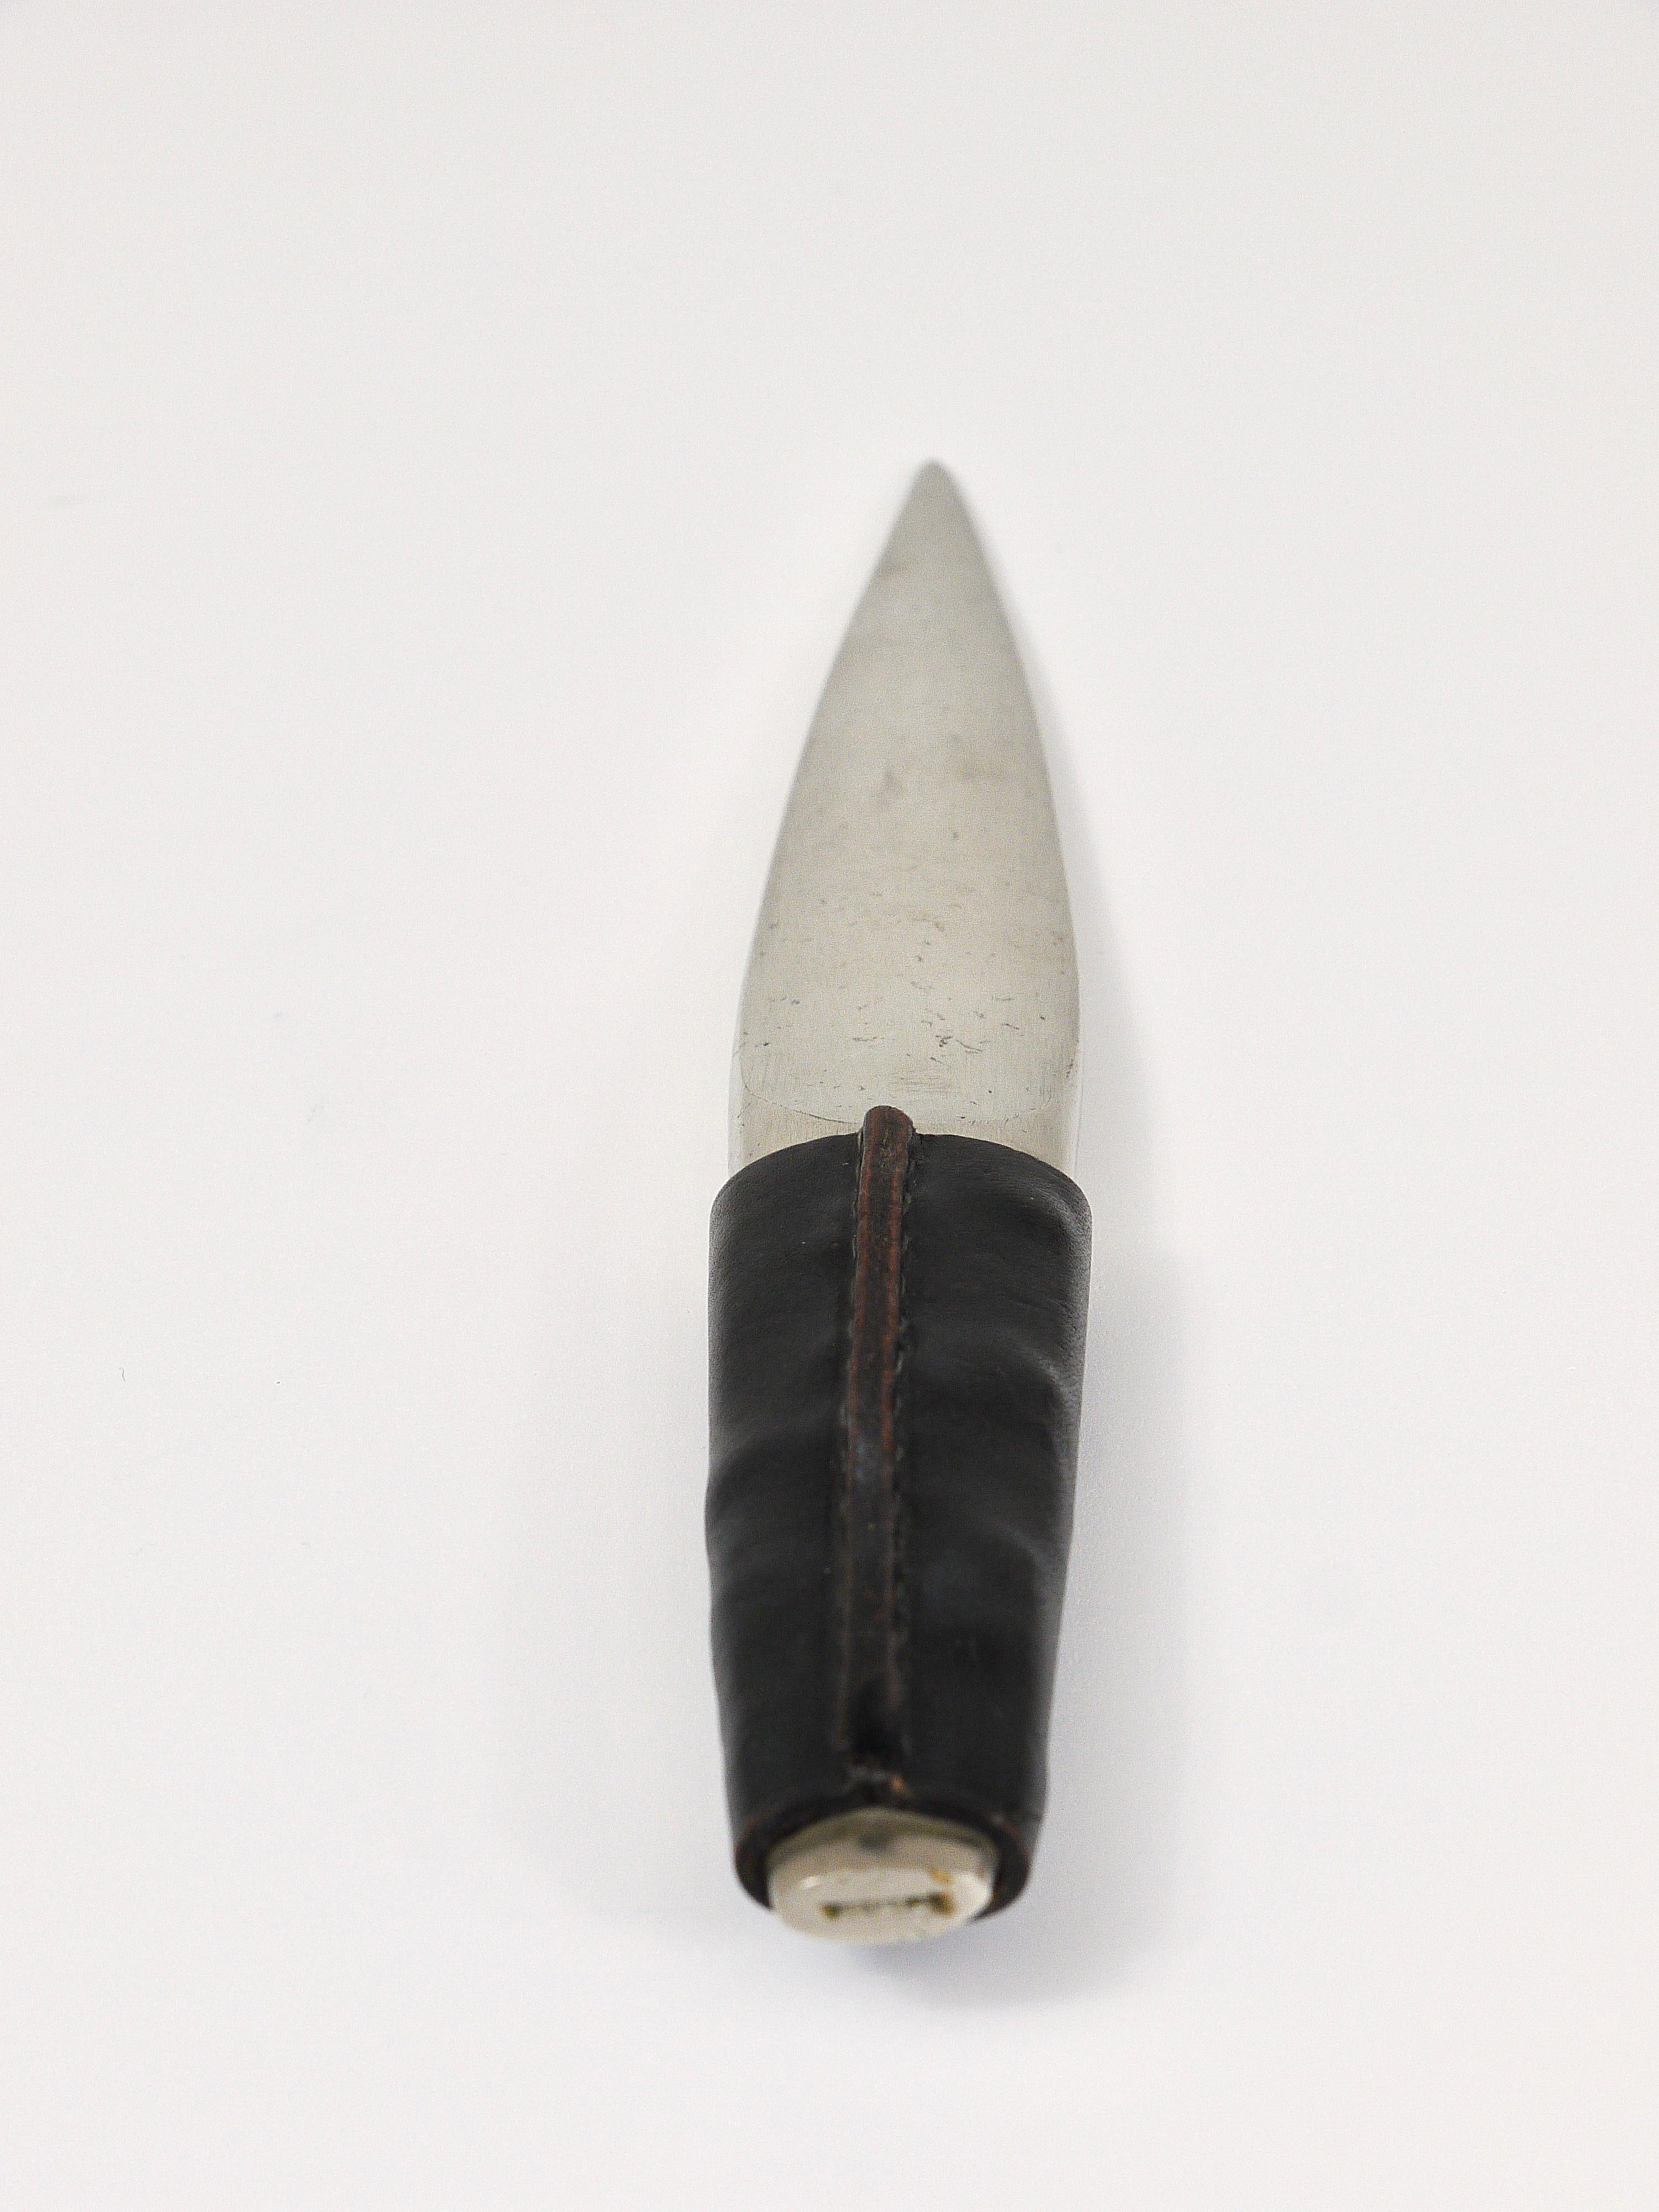 Mid-Century Modern Carl Auböck Nickel-Plated Brass Leather Letter Opener, Paper Knife, 1950s For Sale